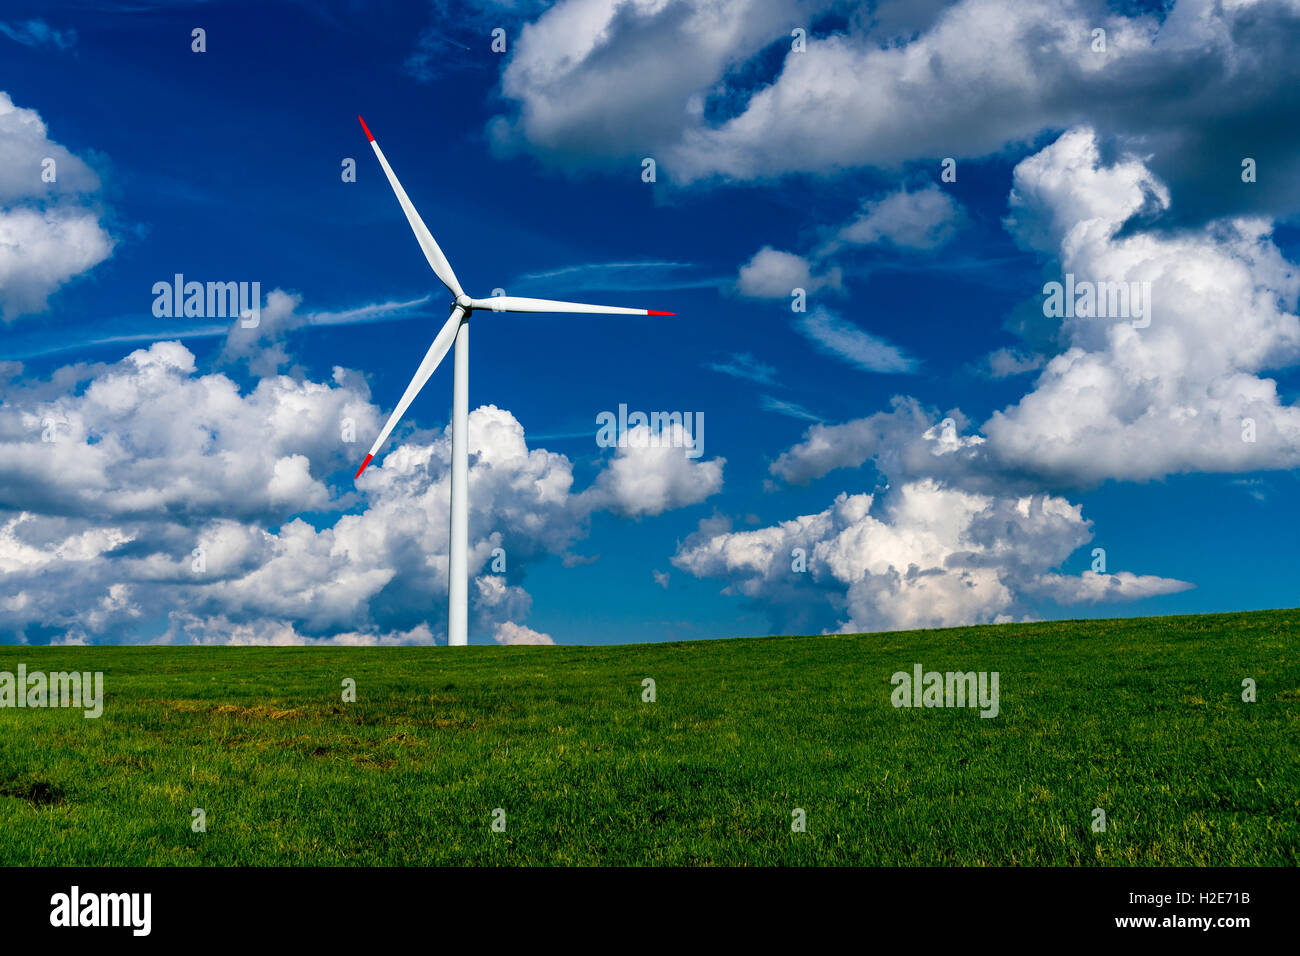 Wind power plant in agricultural landscape, Hermsdorf, Saxony, Germany Stock Photo